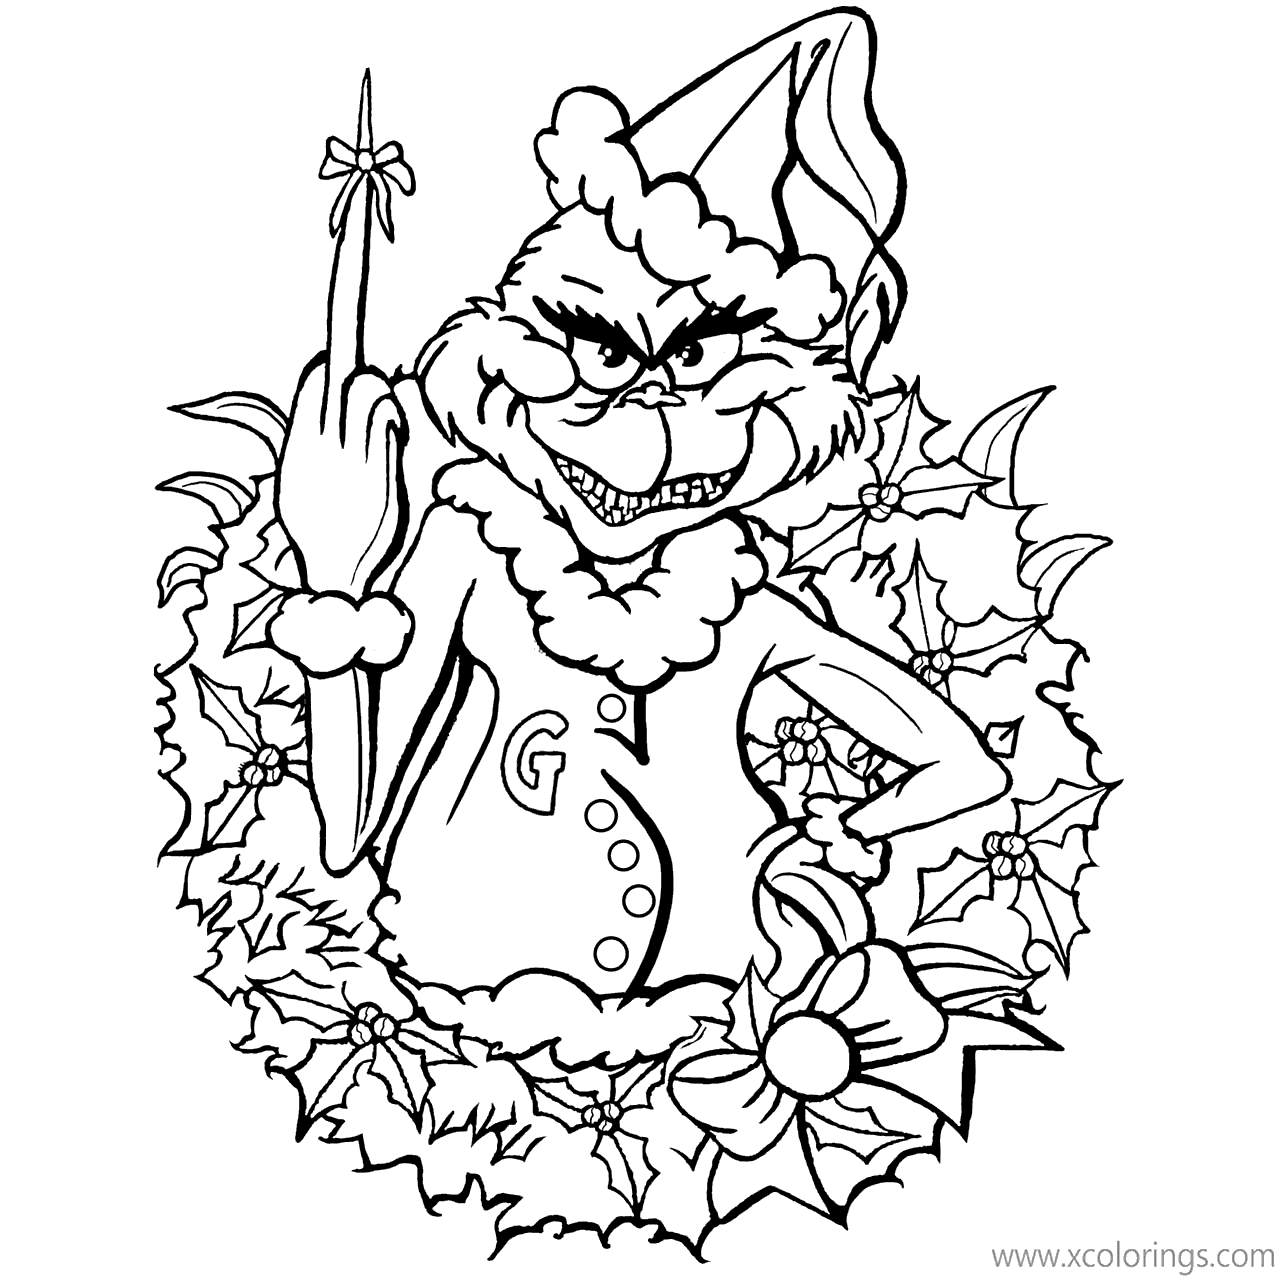 Free Grinch Coloring Pages with Christmas Wreath printable